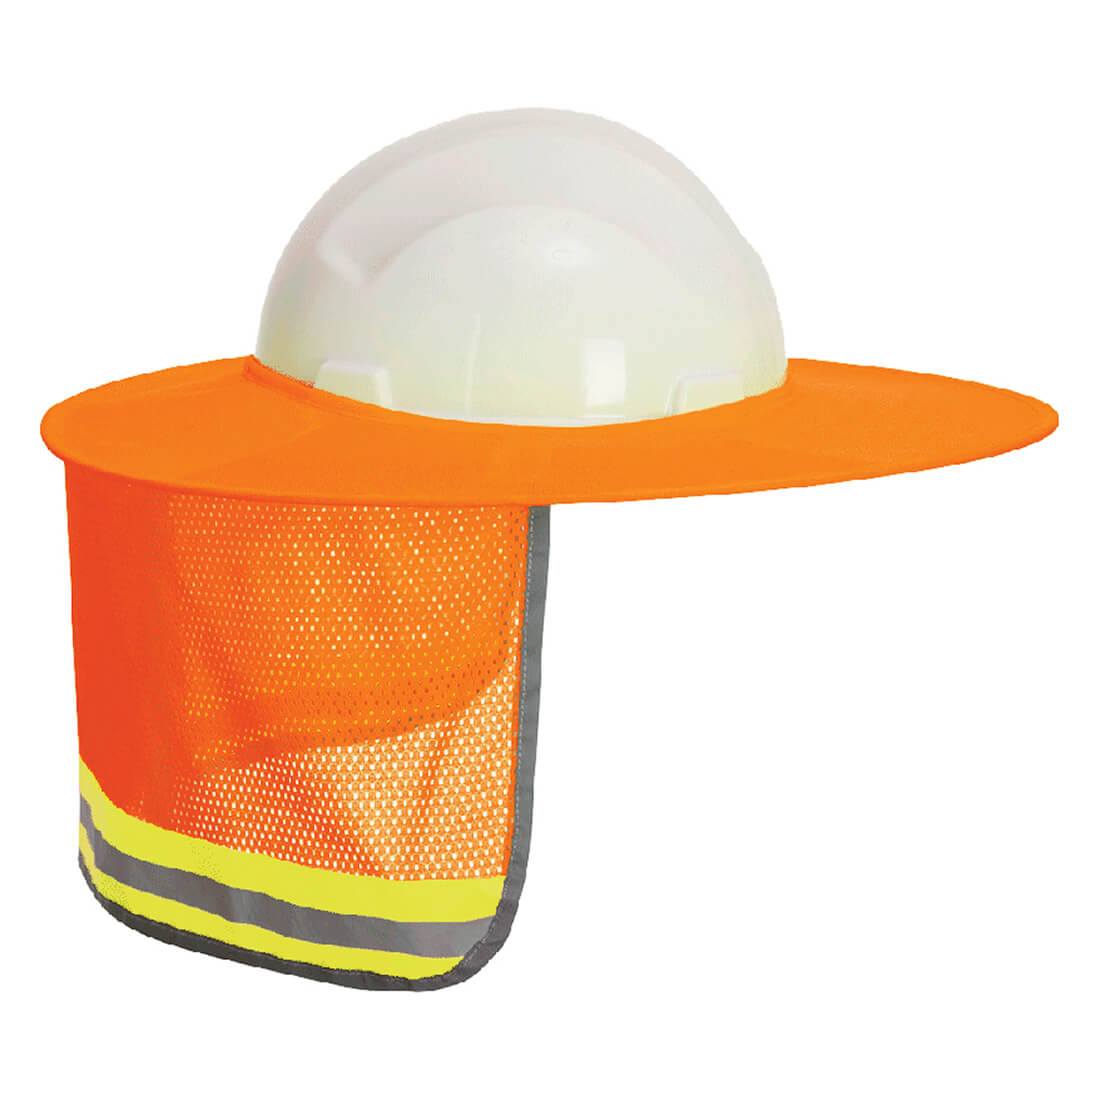 High Visibility, High Visibility Accessories